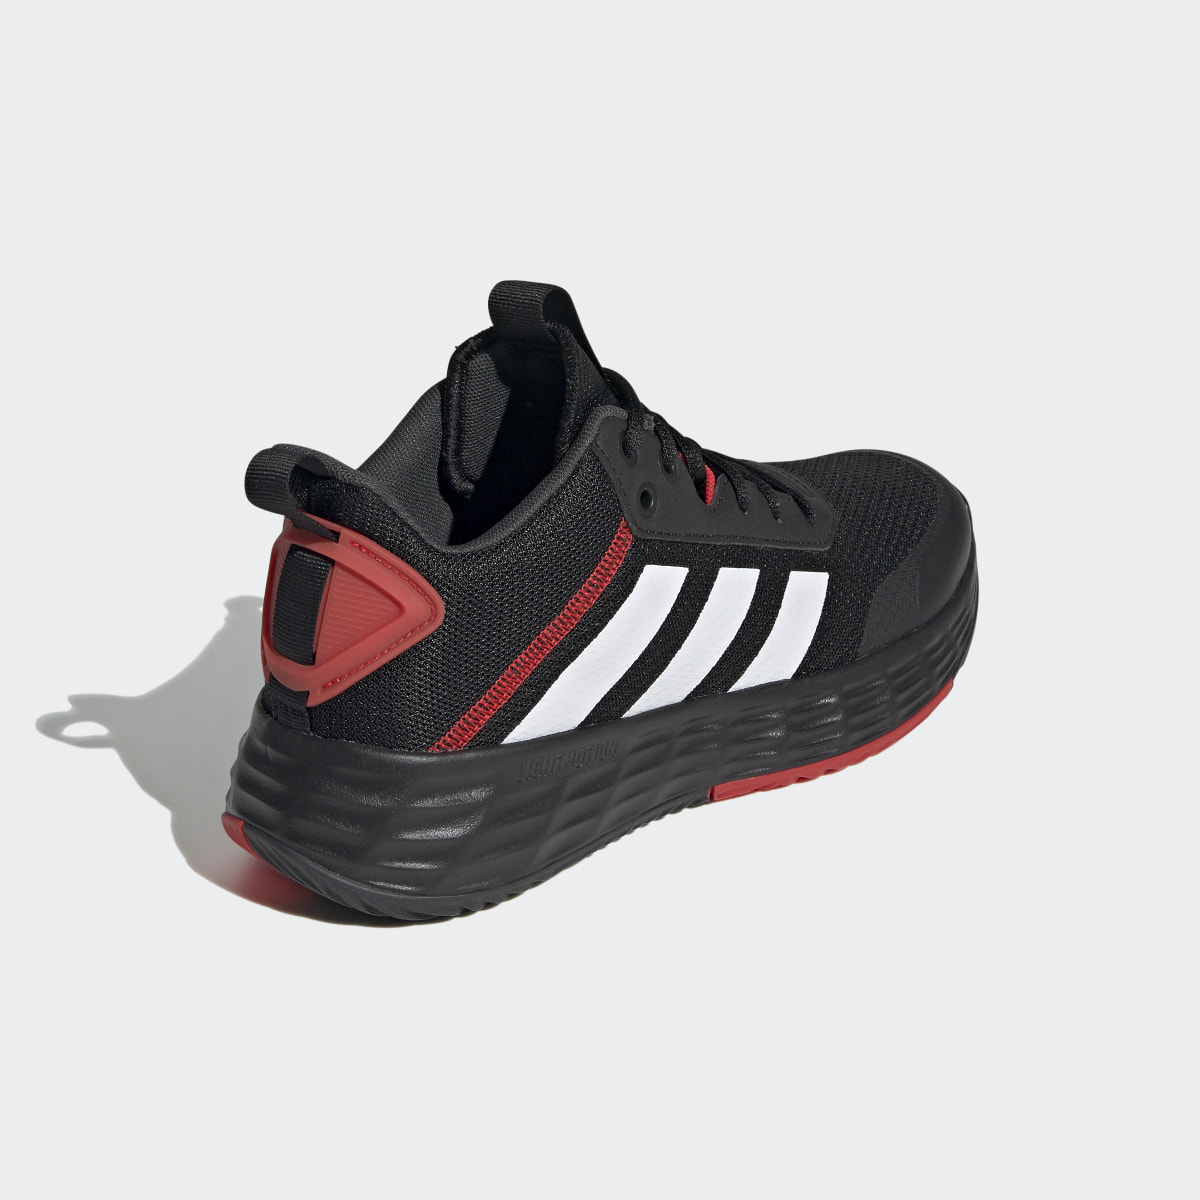 Adidas Chaussure Ownthegame. 6